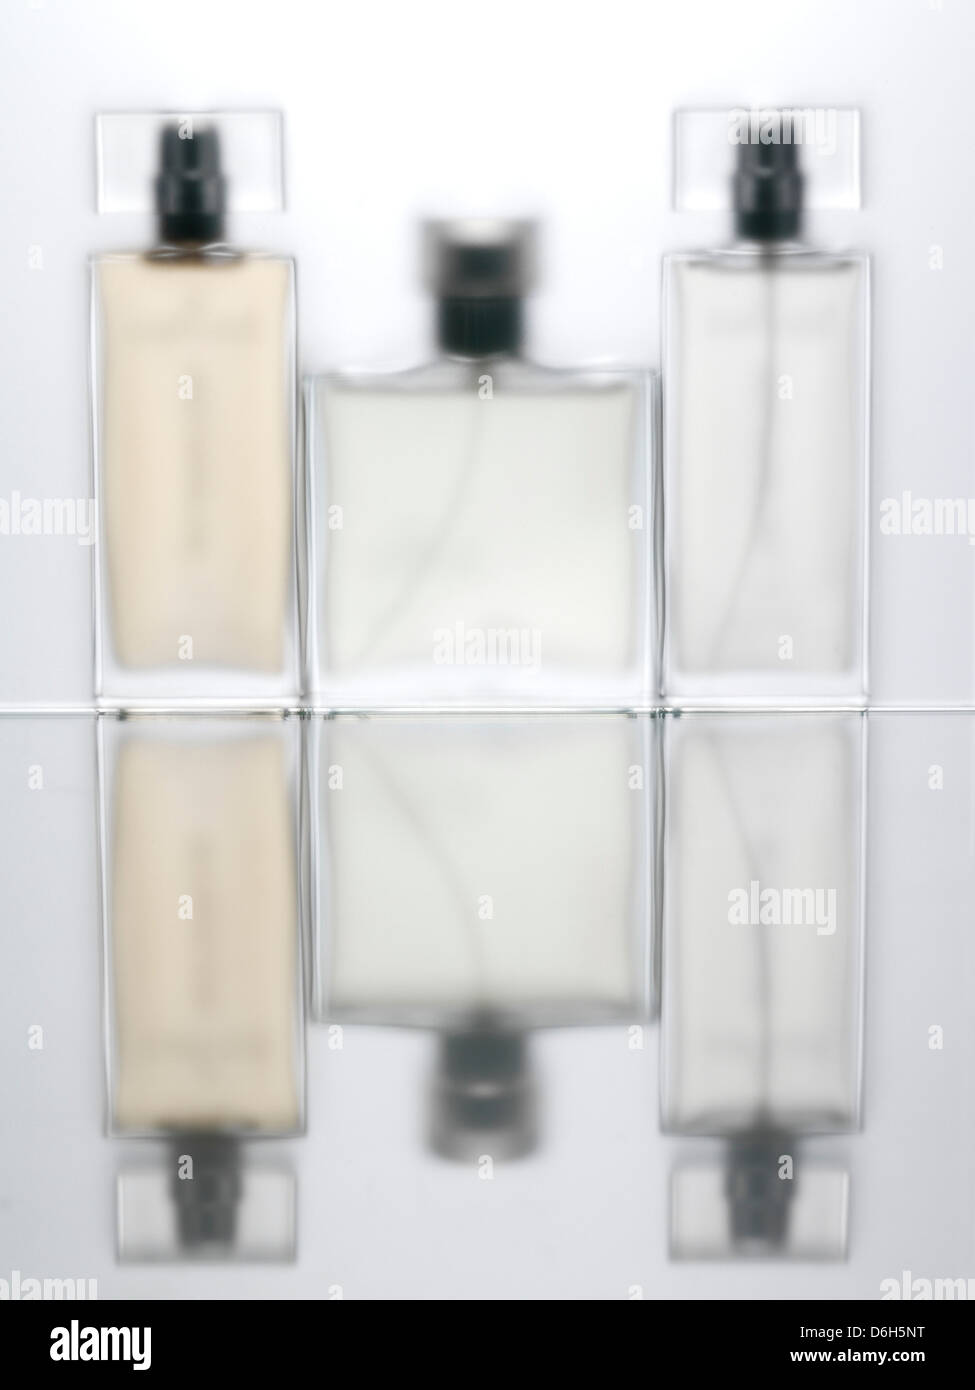 Blurred view of perfume bottles Stock Photo